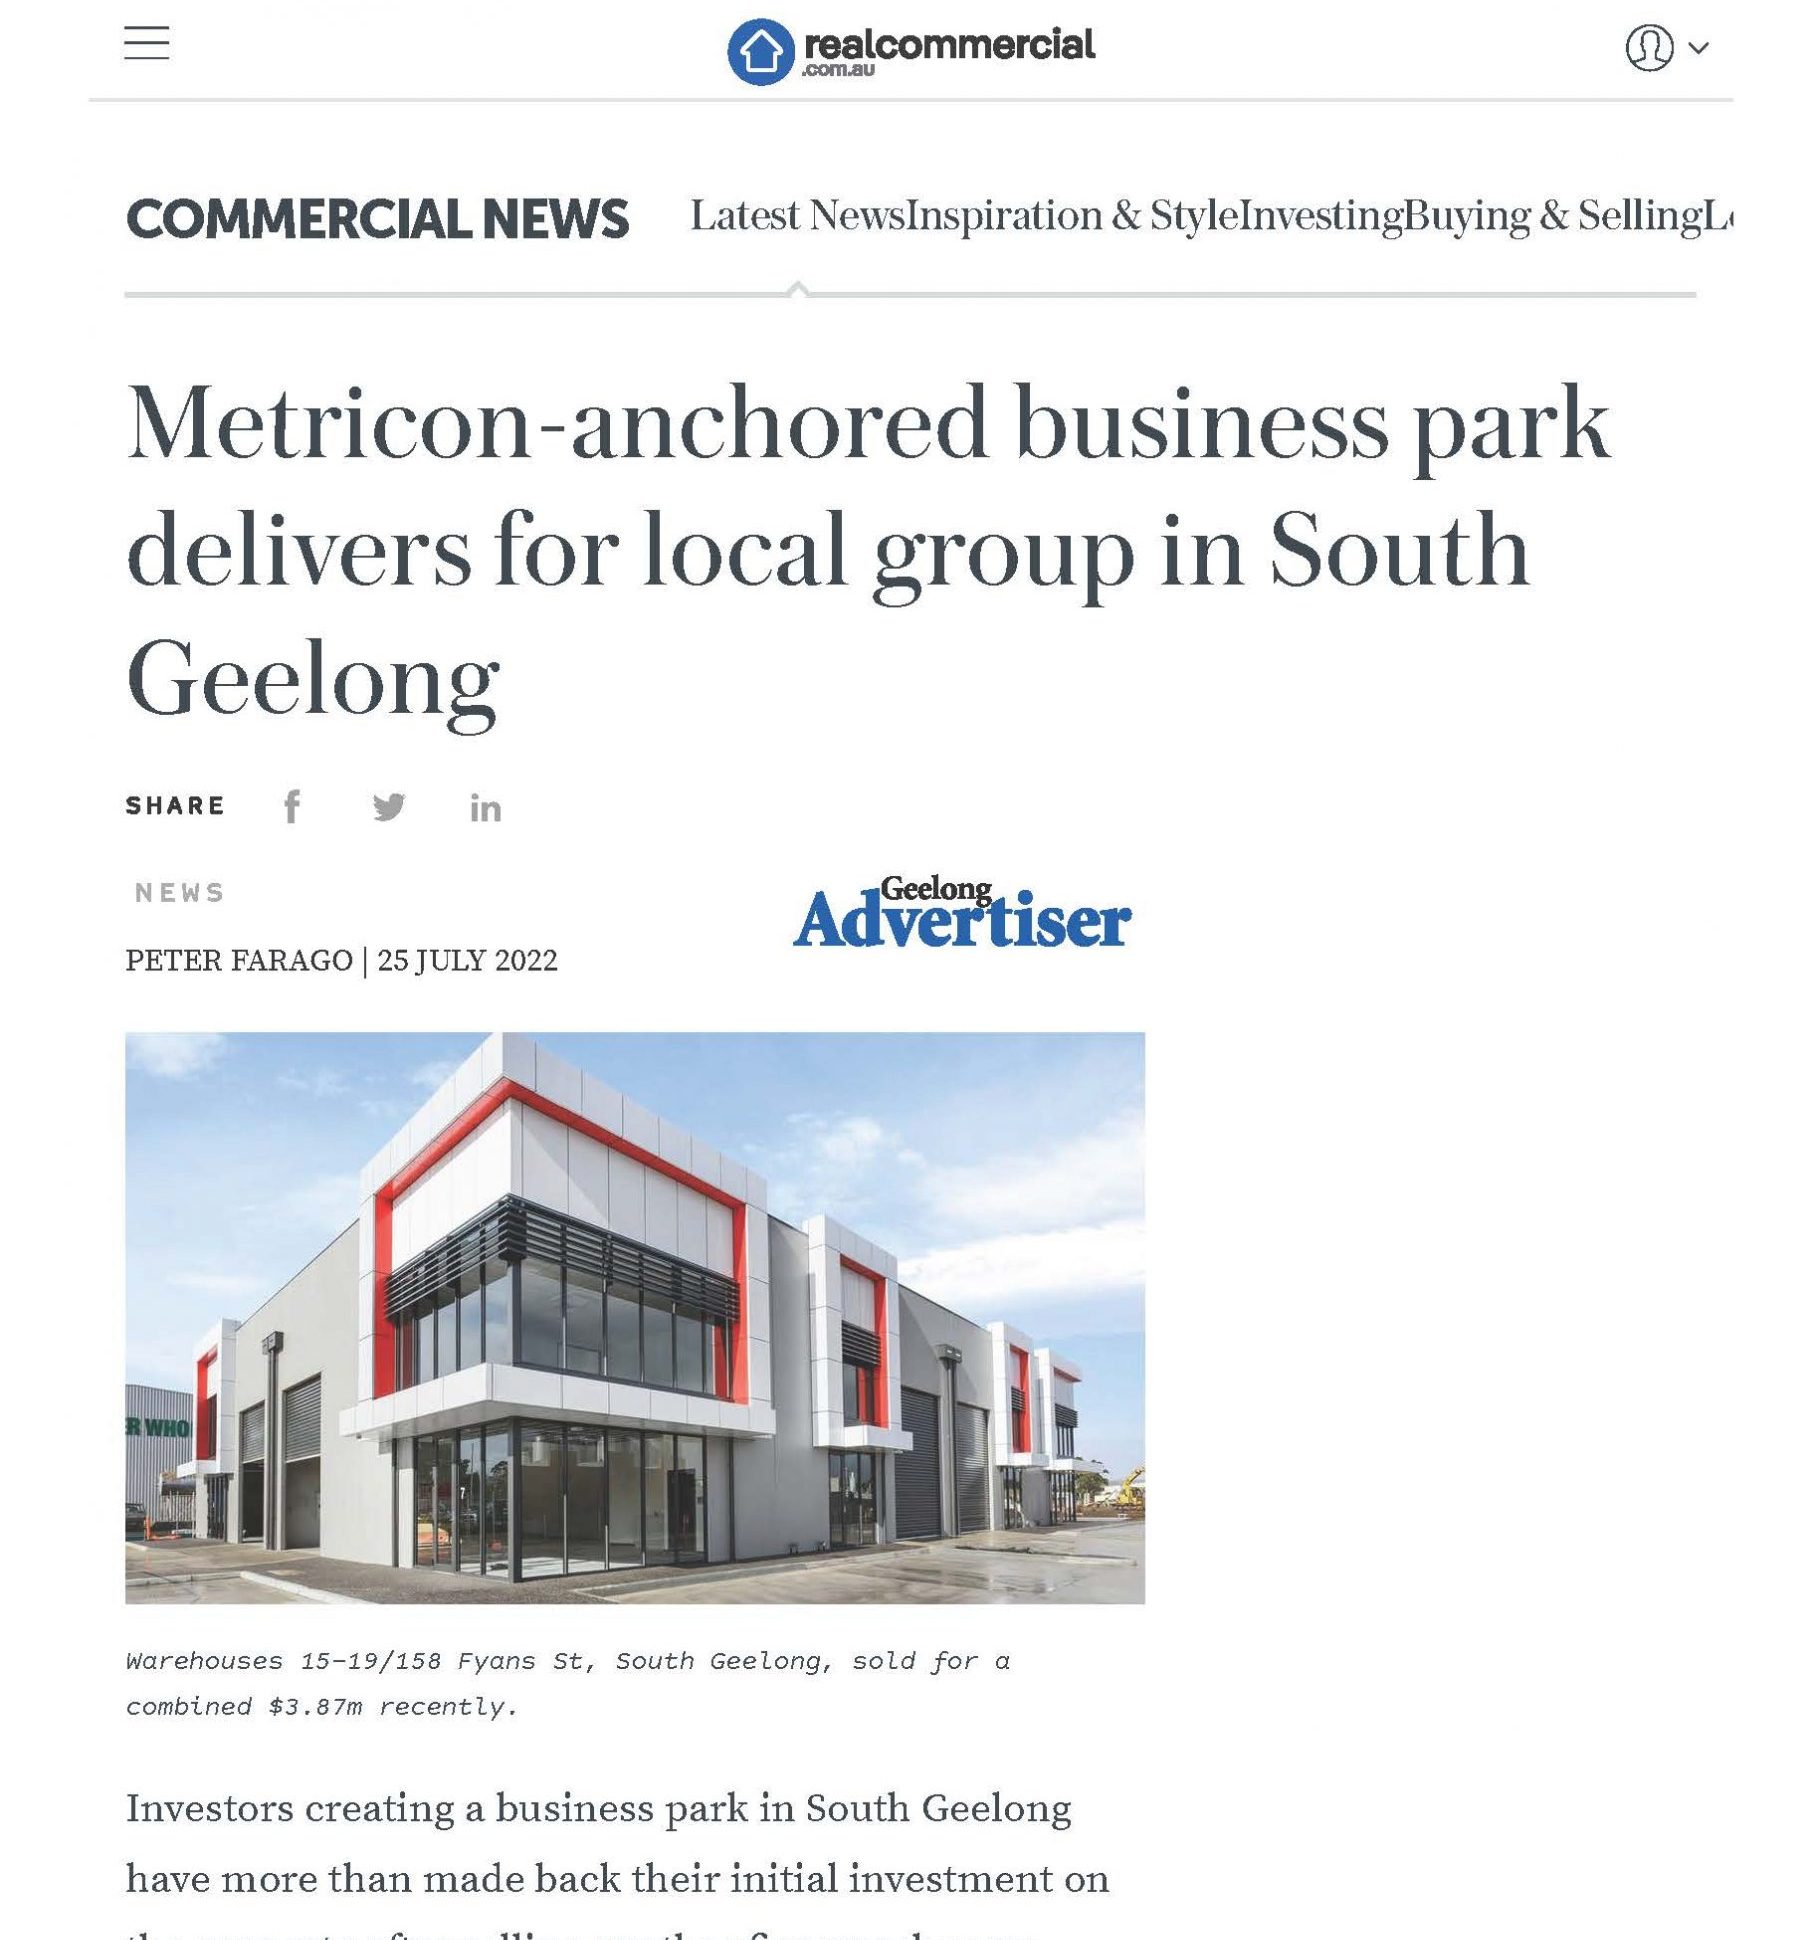 Metricon-anchored business park delivers for local group in South Geelong